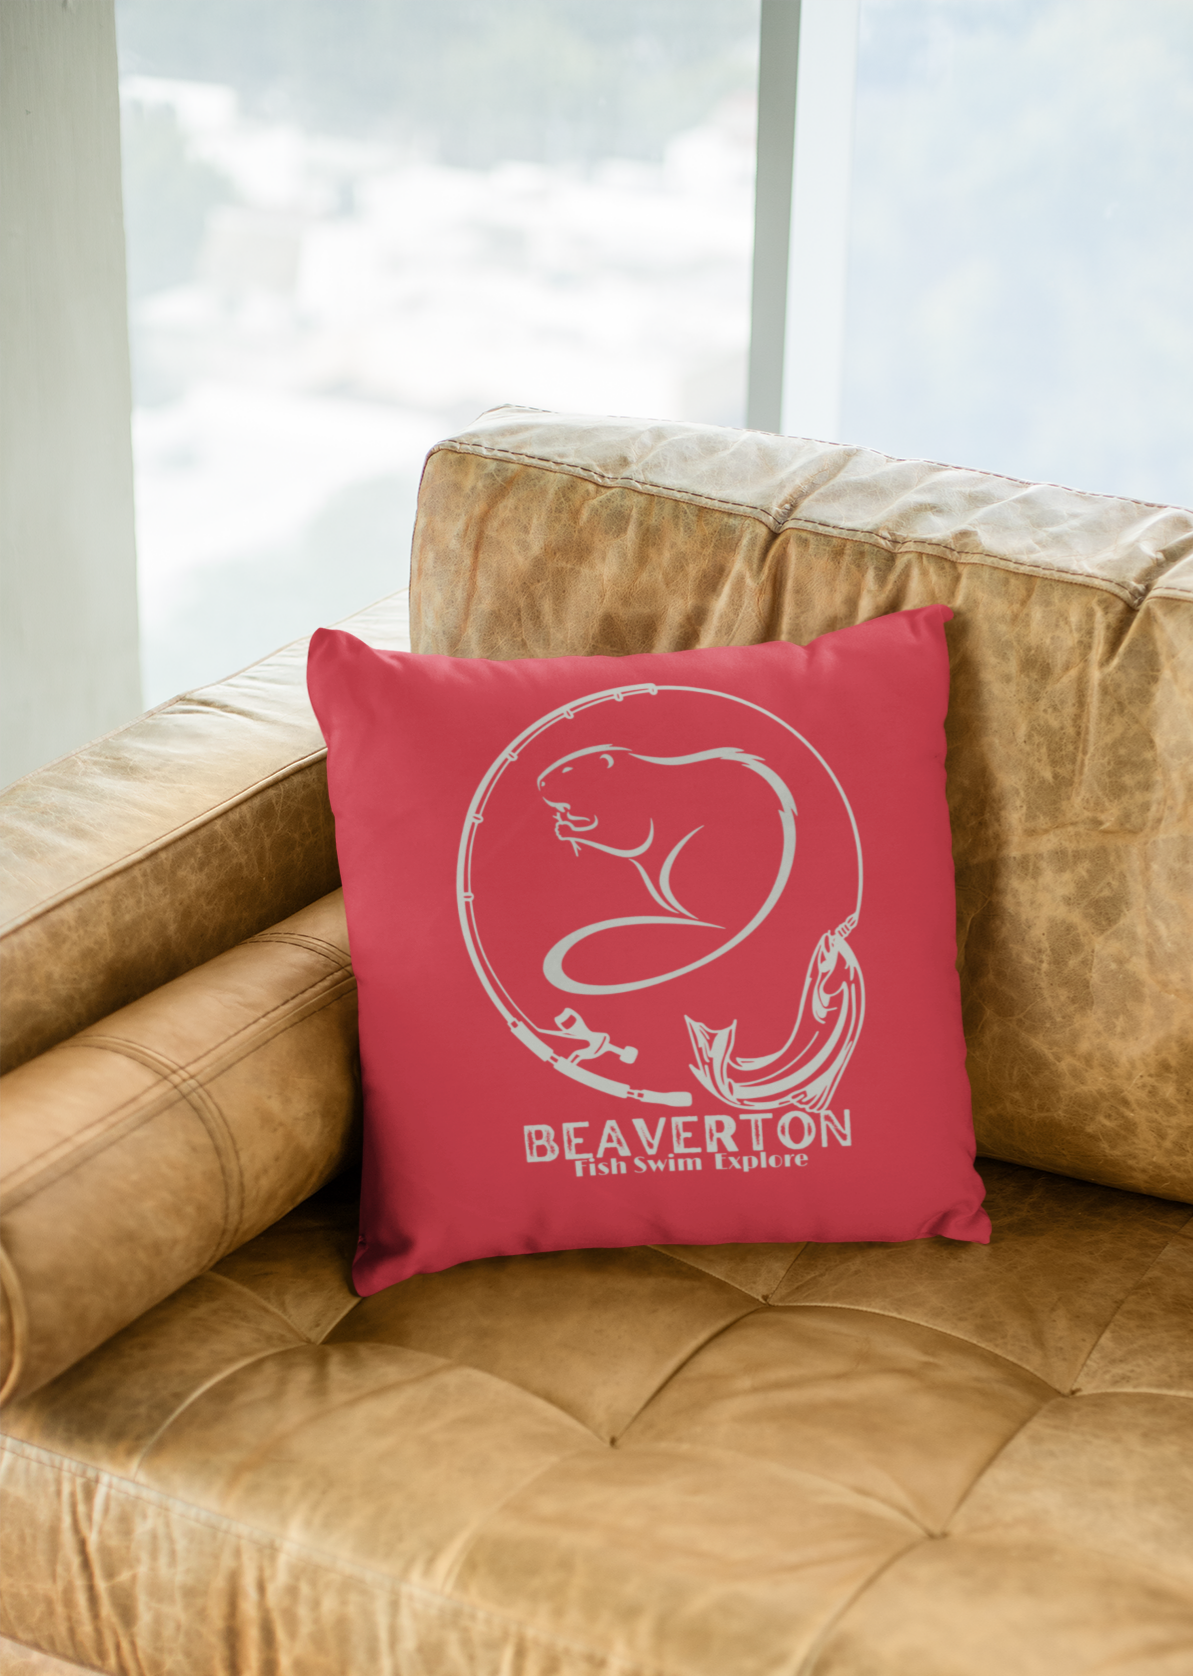 Beaverton Square Pillow in Red